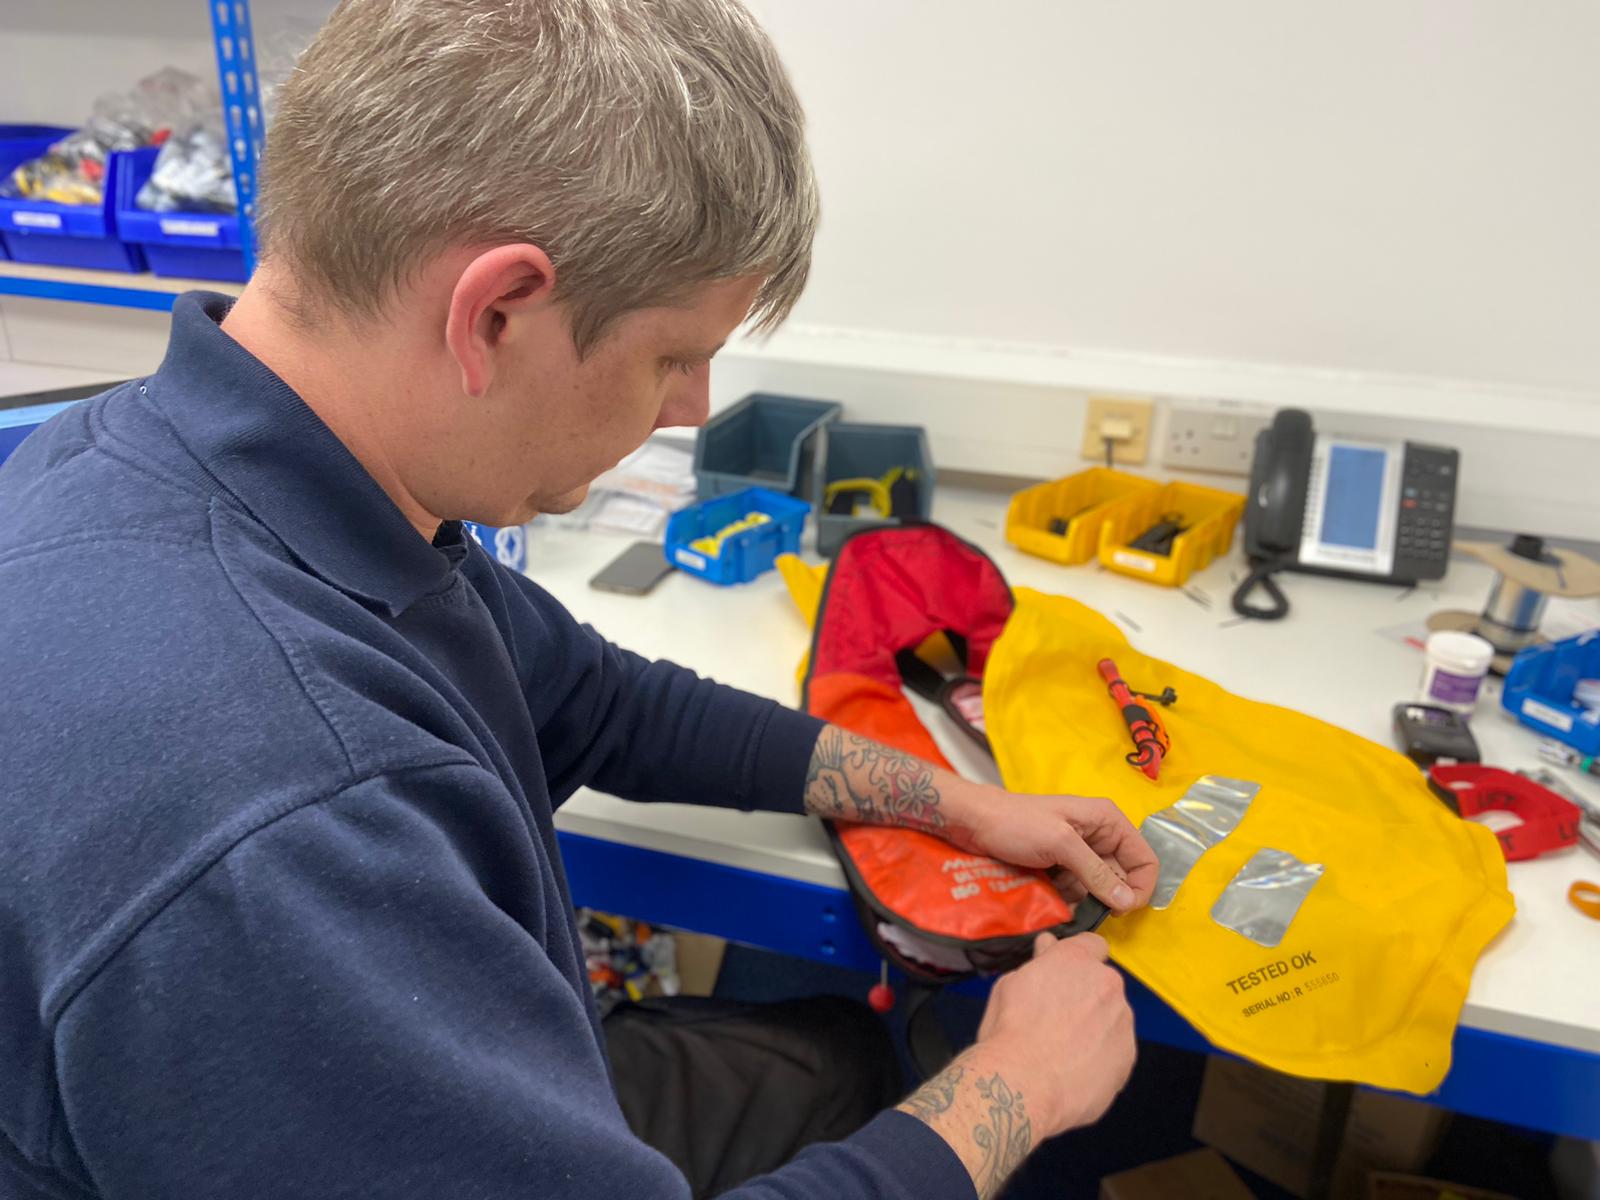 Expert lifejacket servicing in the UK, keeping you safe on the water